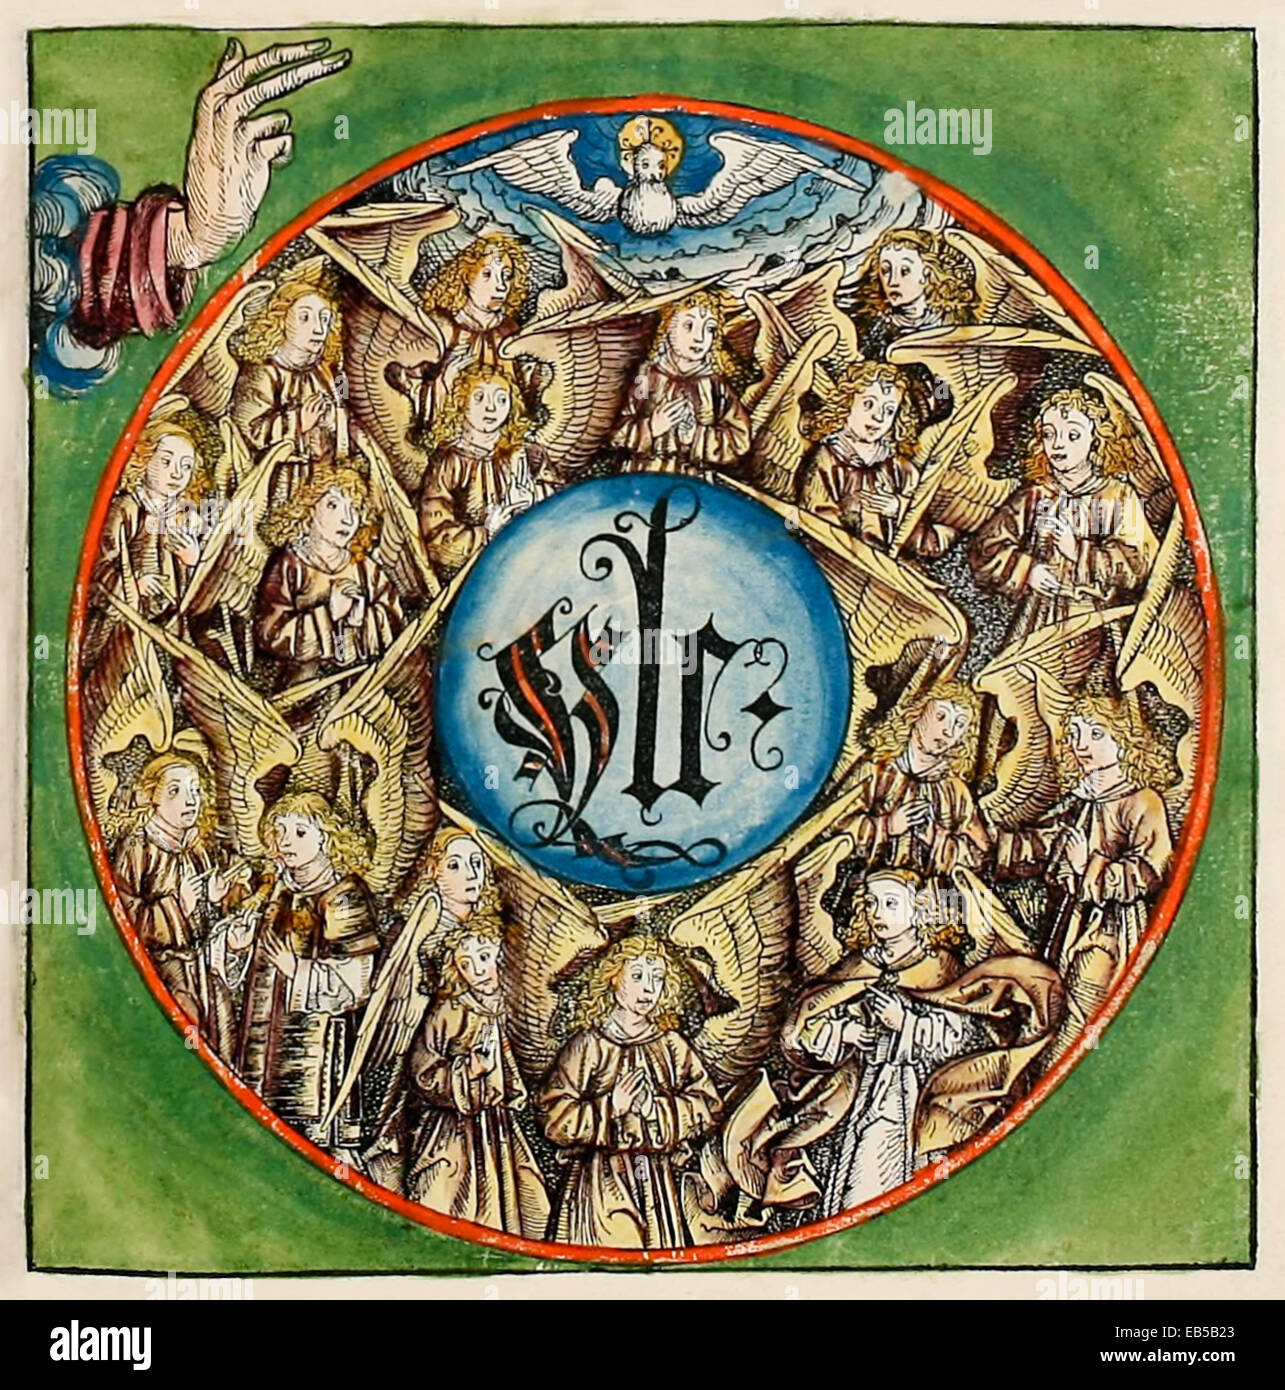 The Heavenly Chorus, God creating the angels. From 'Nuremberg Chronicle' or 'Liber Chronicarum' by Hartmann Schedel (1440-1514). See description for more information. Stock Photo